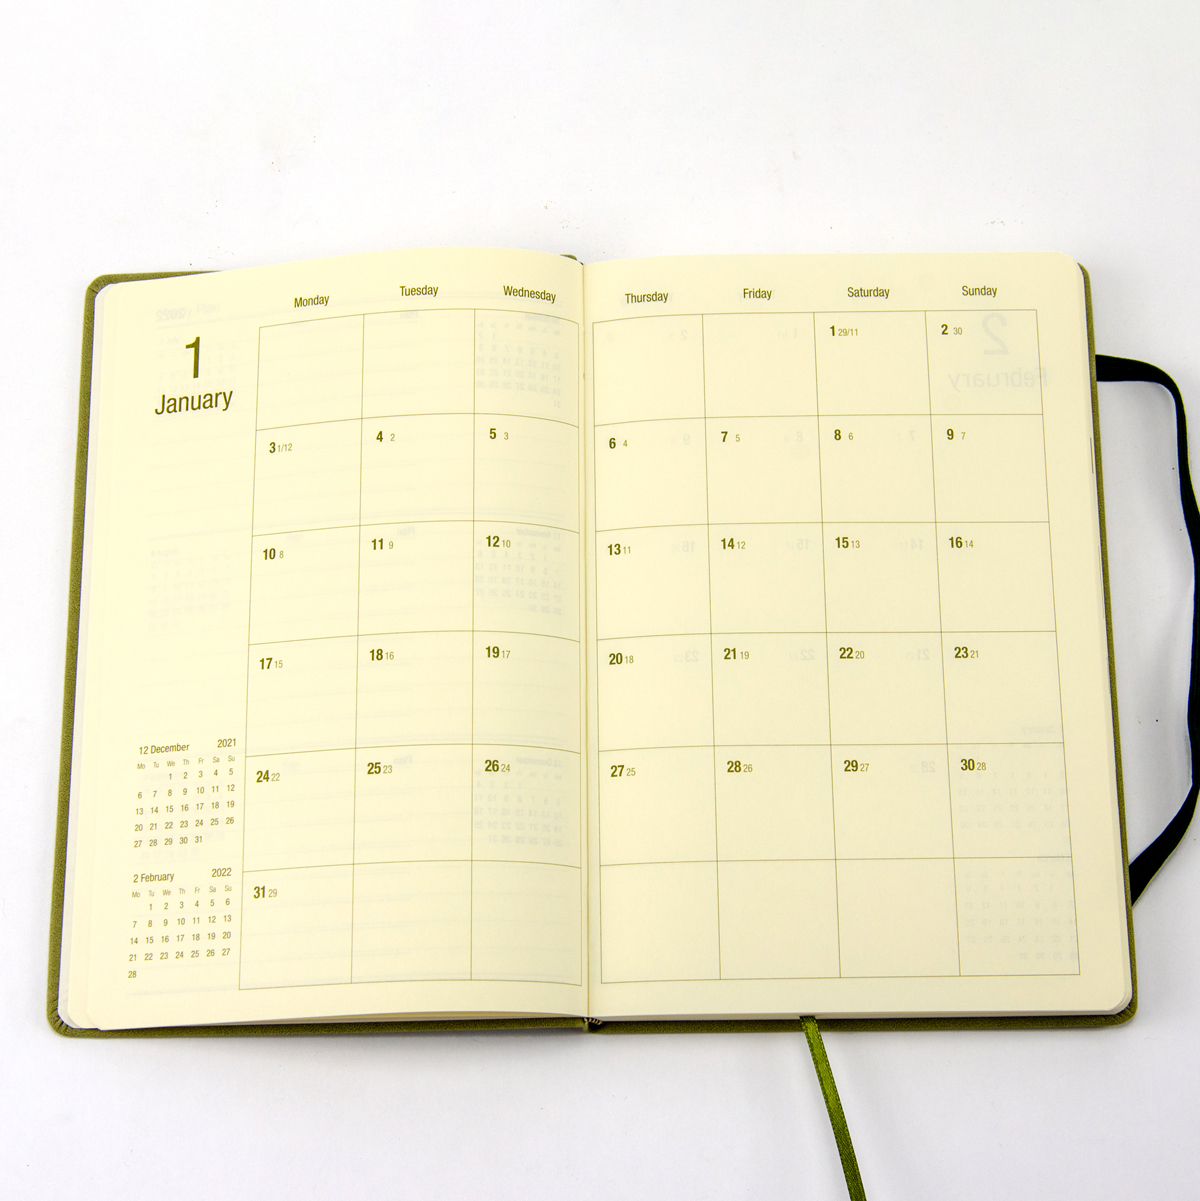 Sổ Lịch Planner 2022 - Nguyễn Trắc - Size A5